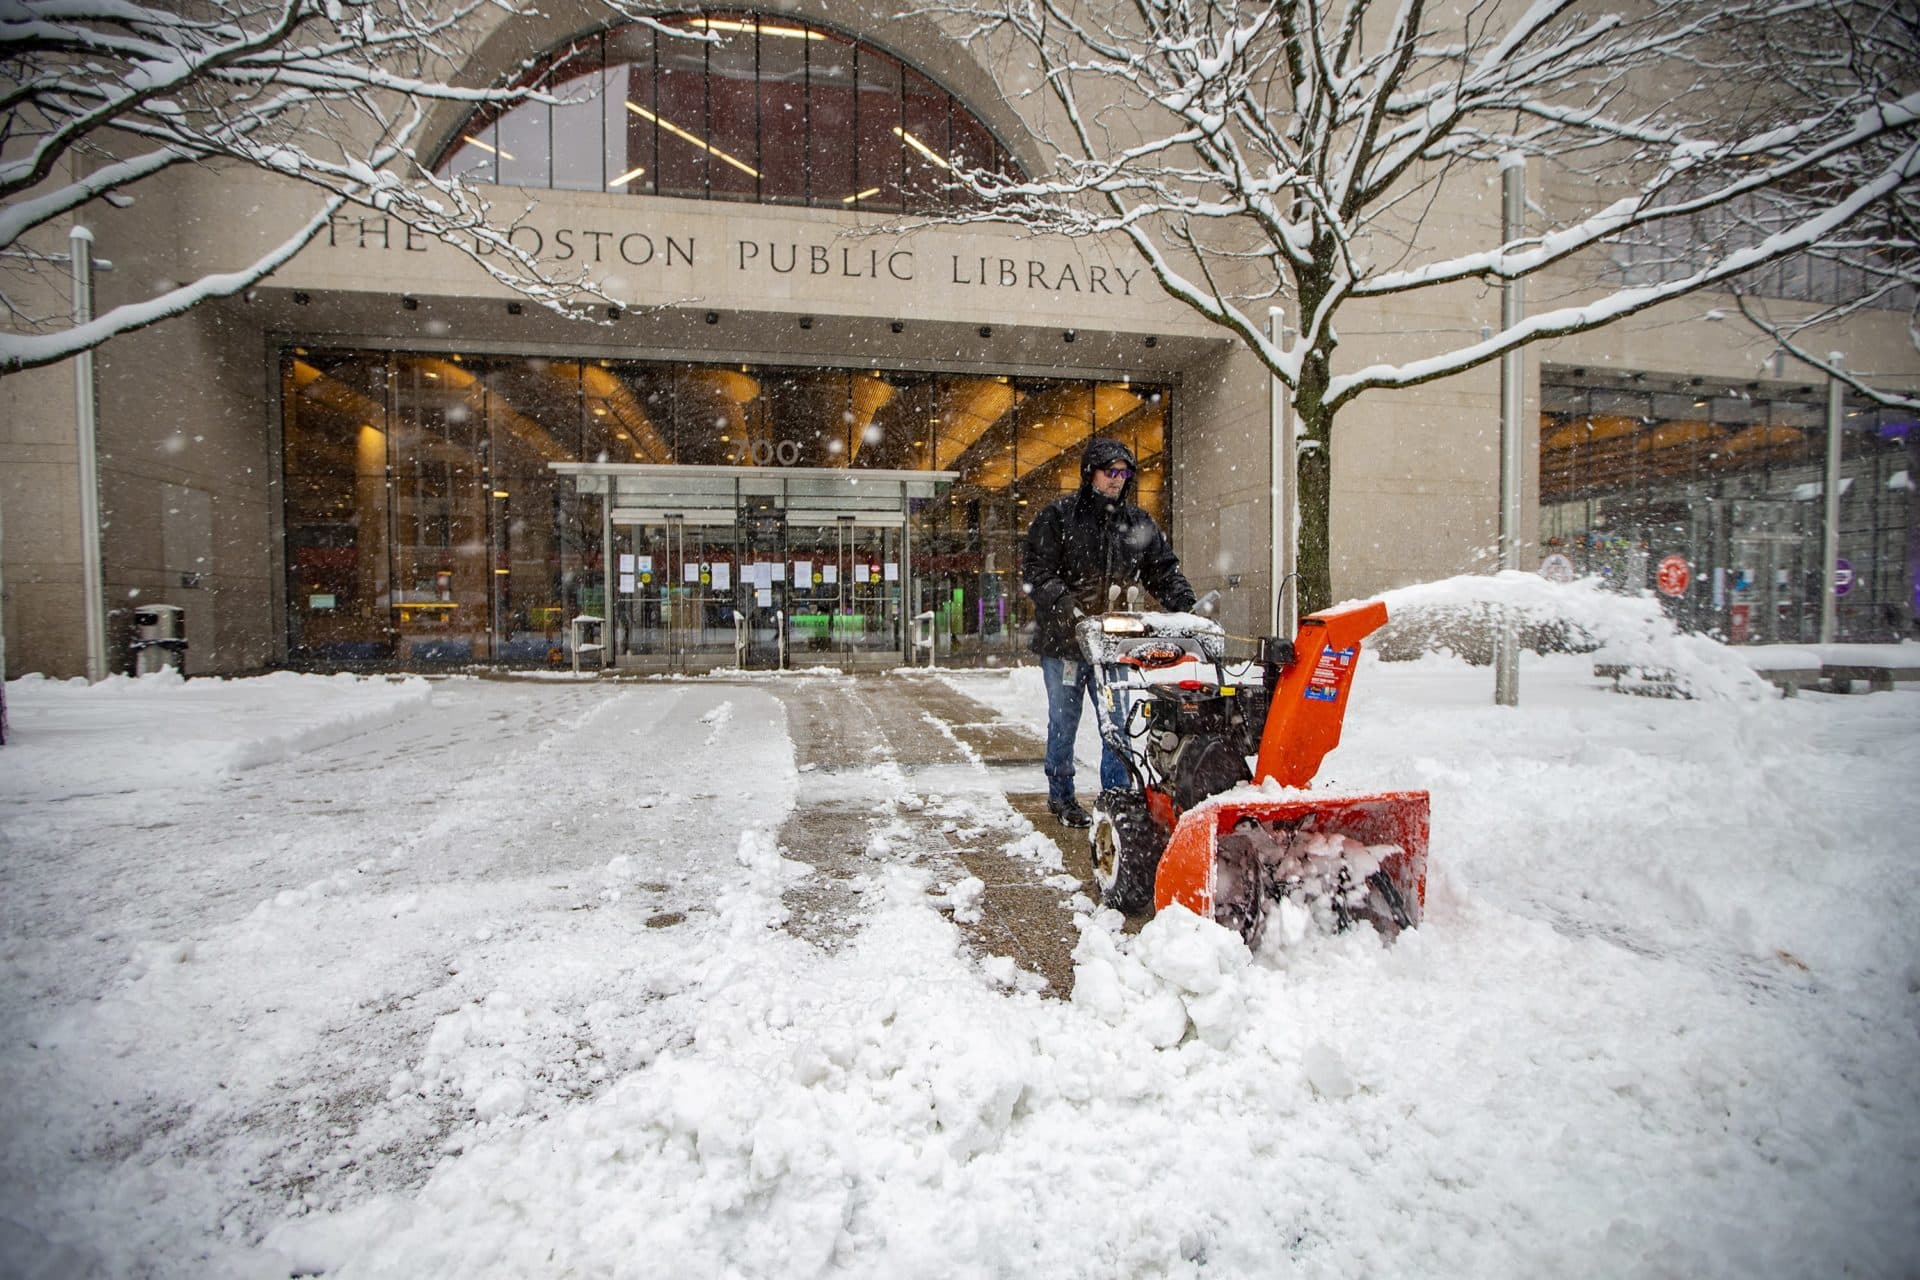 A worker uses a snow blow to clear snow in front of the Boston Public Library on Friday morning. (Jesse Costa/WBUR)